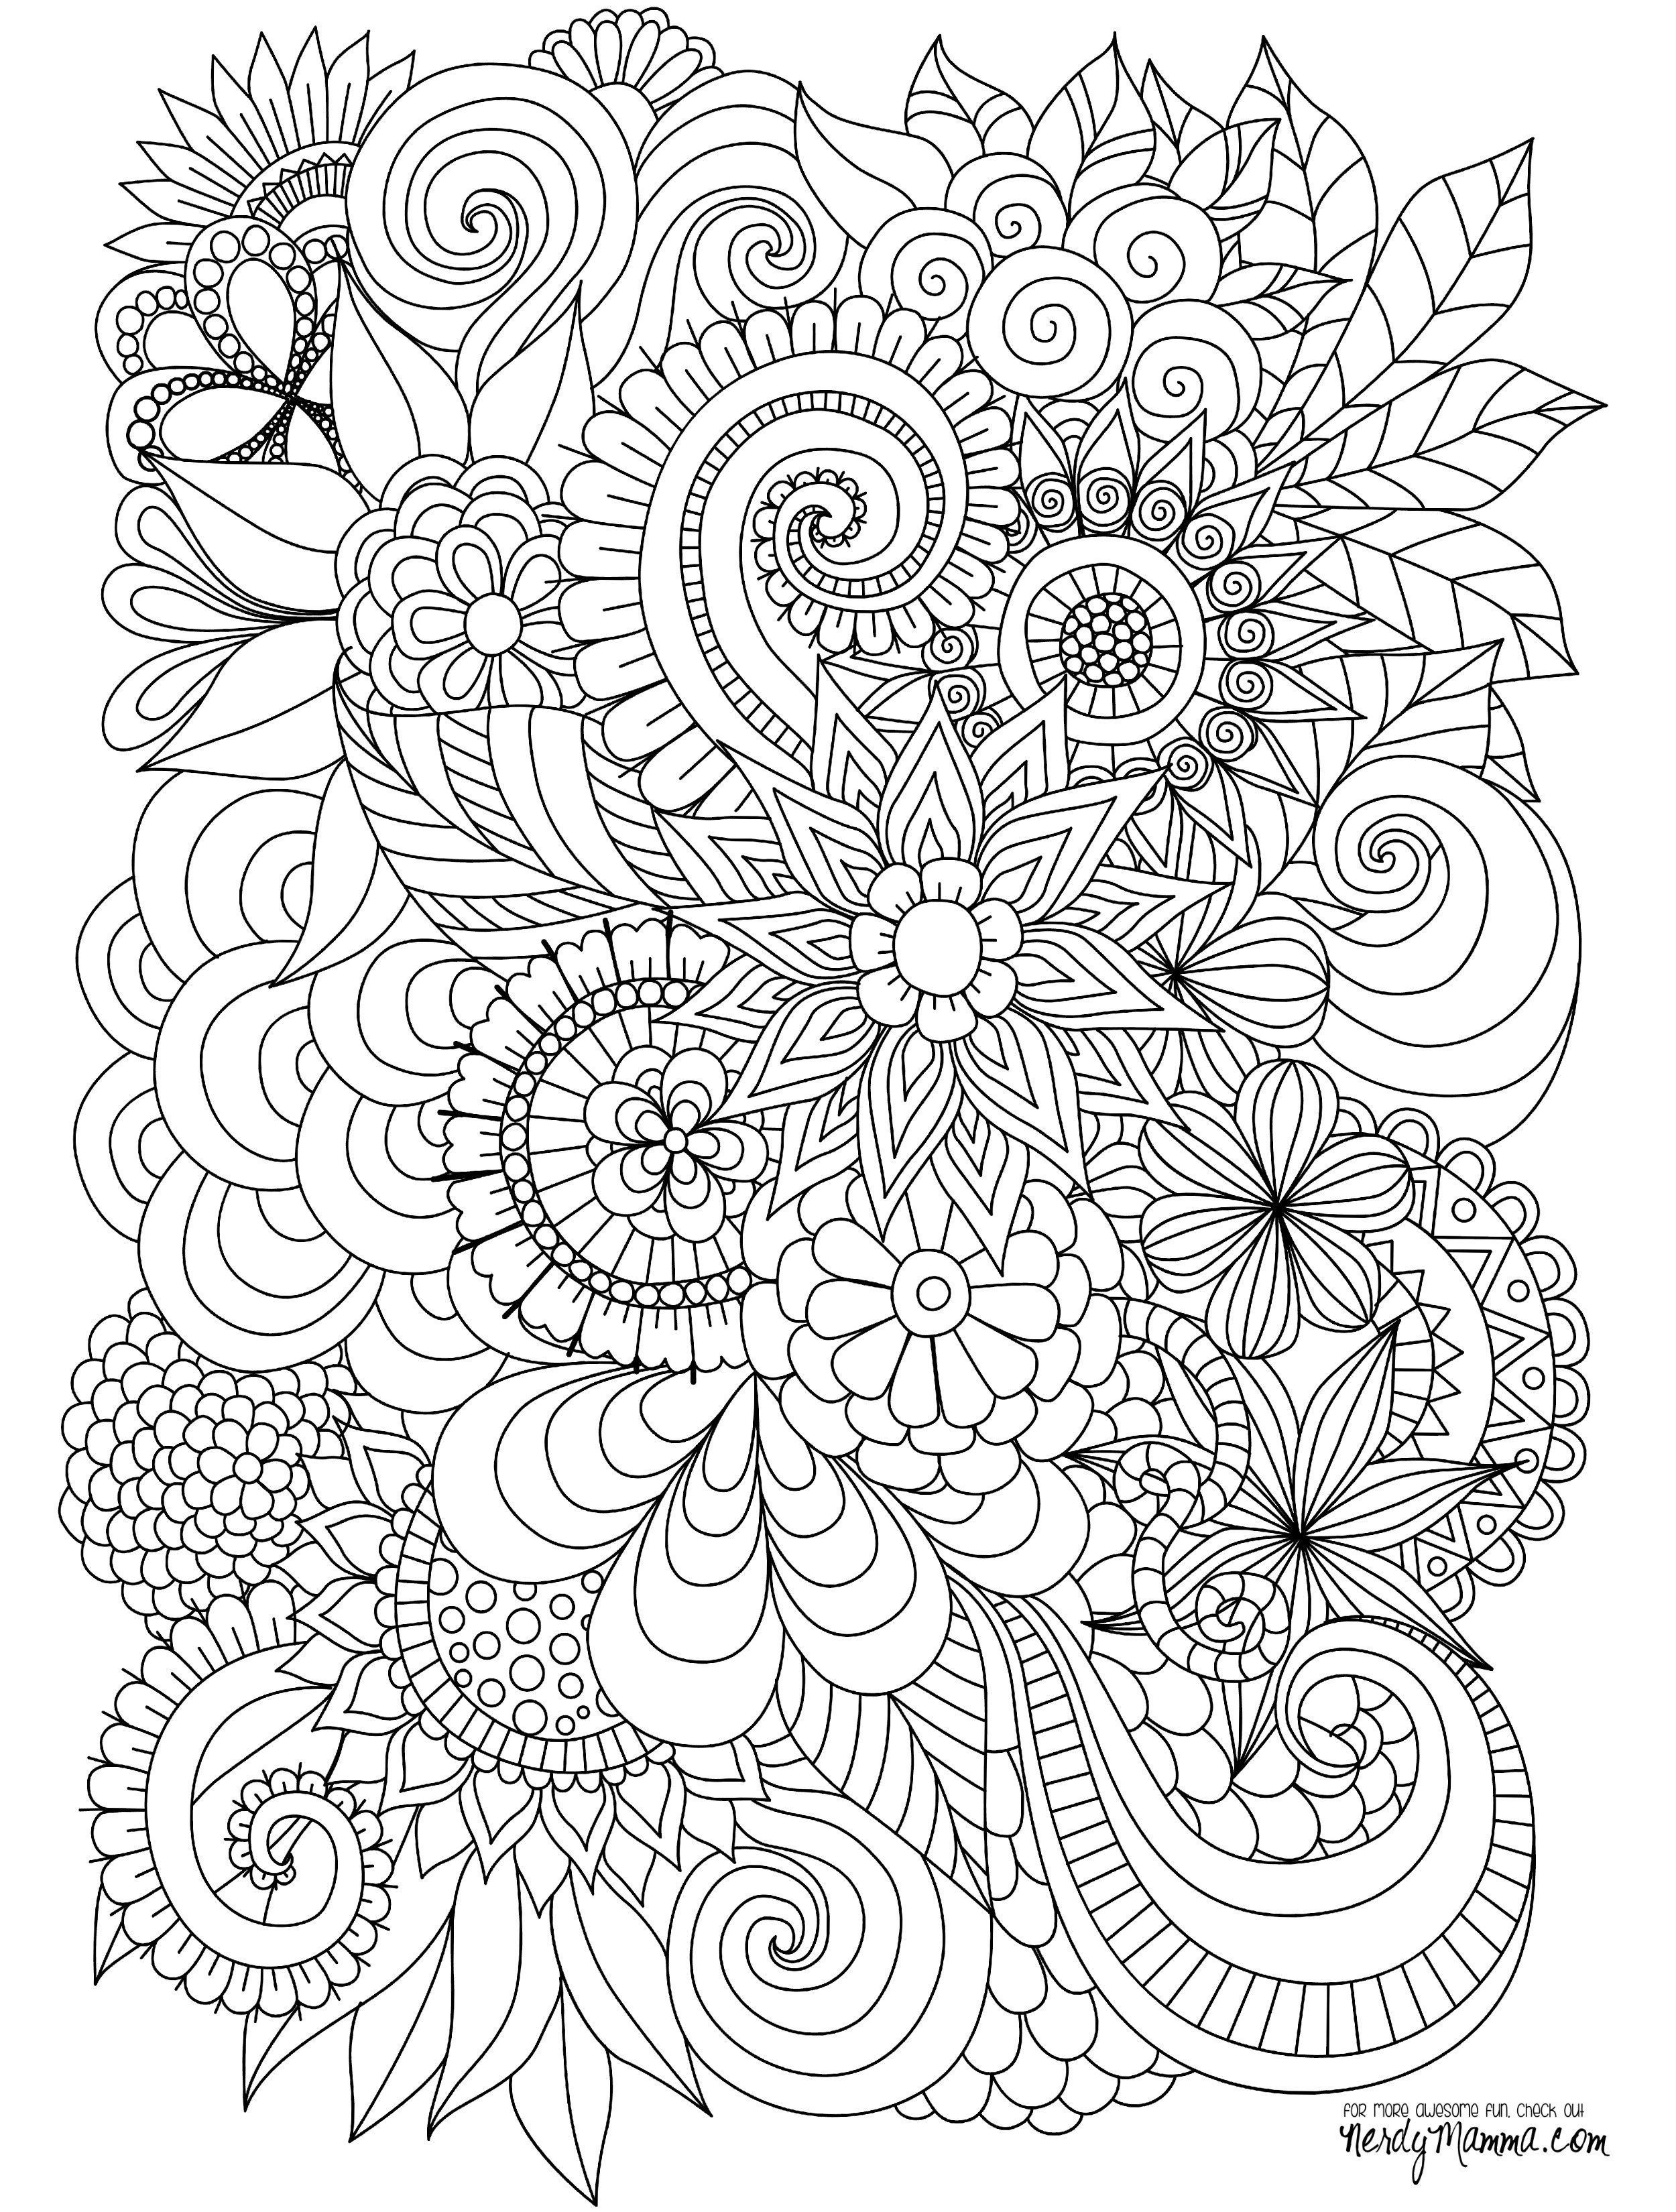 28 Unique Different Types Of Vases 2024 free download different types of vases of adult coloring flowers best of cool vases flower vase coloring page in adult coloring flowers best of cool vases flower vase coloring page pages flowers in a top